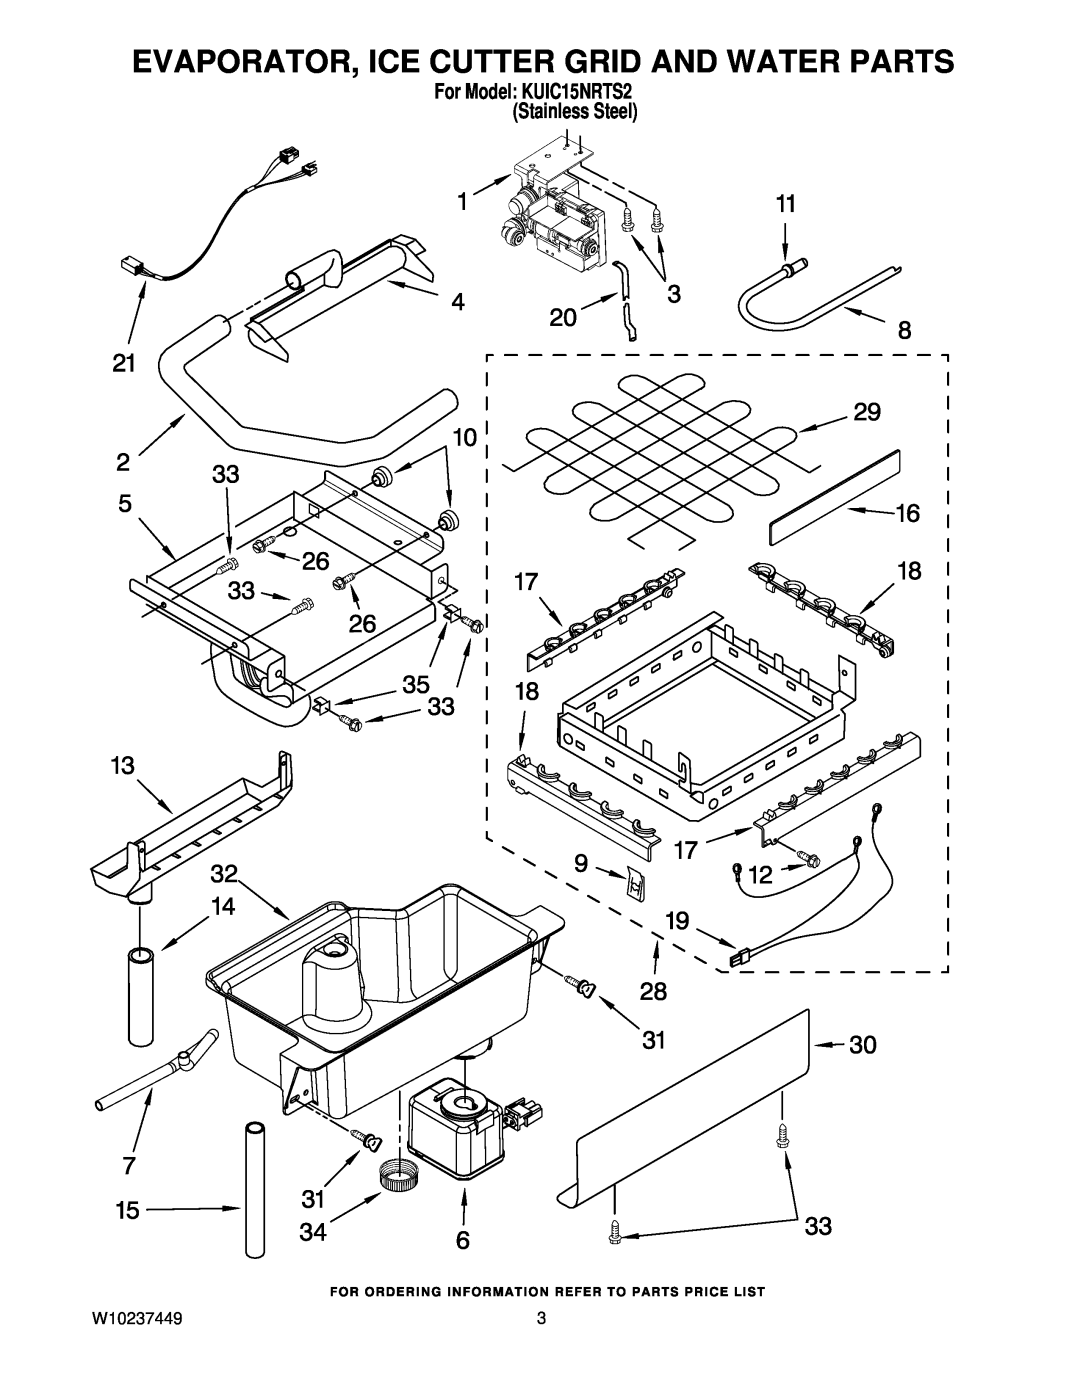 KitchenAid manual Evaporator, Ice Cutter Grid And Water Parts, W10237449, For Model KUIC15NRTS2 Stainless Steel 